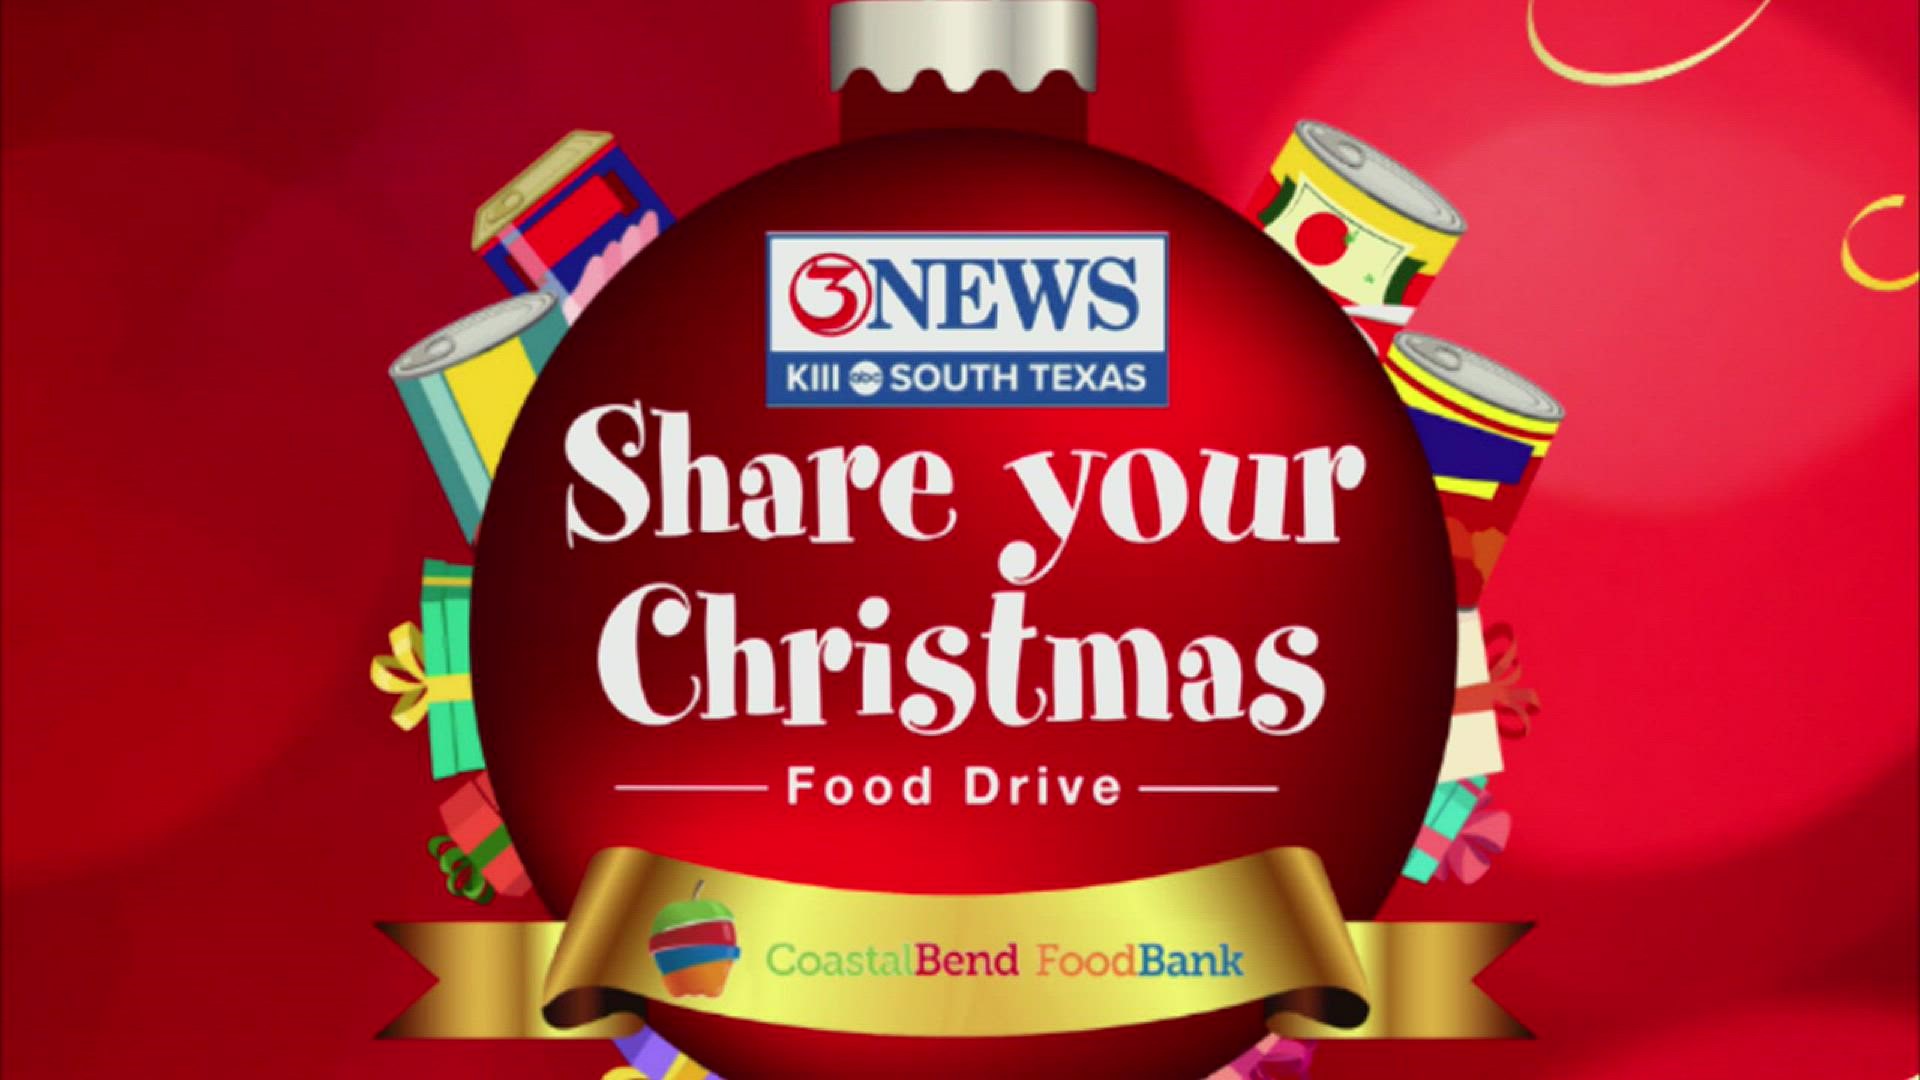 Executive Director of the Coastal Bend Food Bank Bea Hanson joined us live to share all the details of this year's Share Your Christmas food drive.